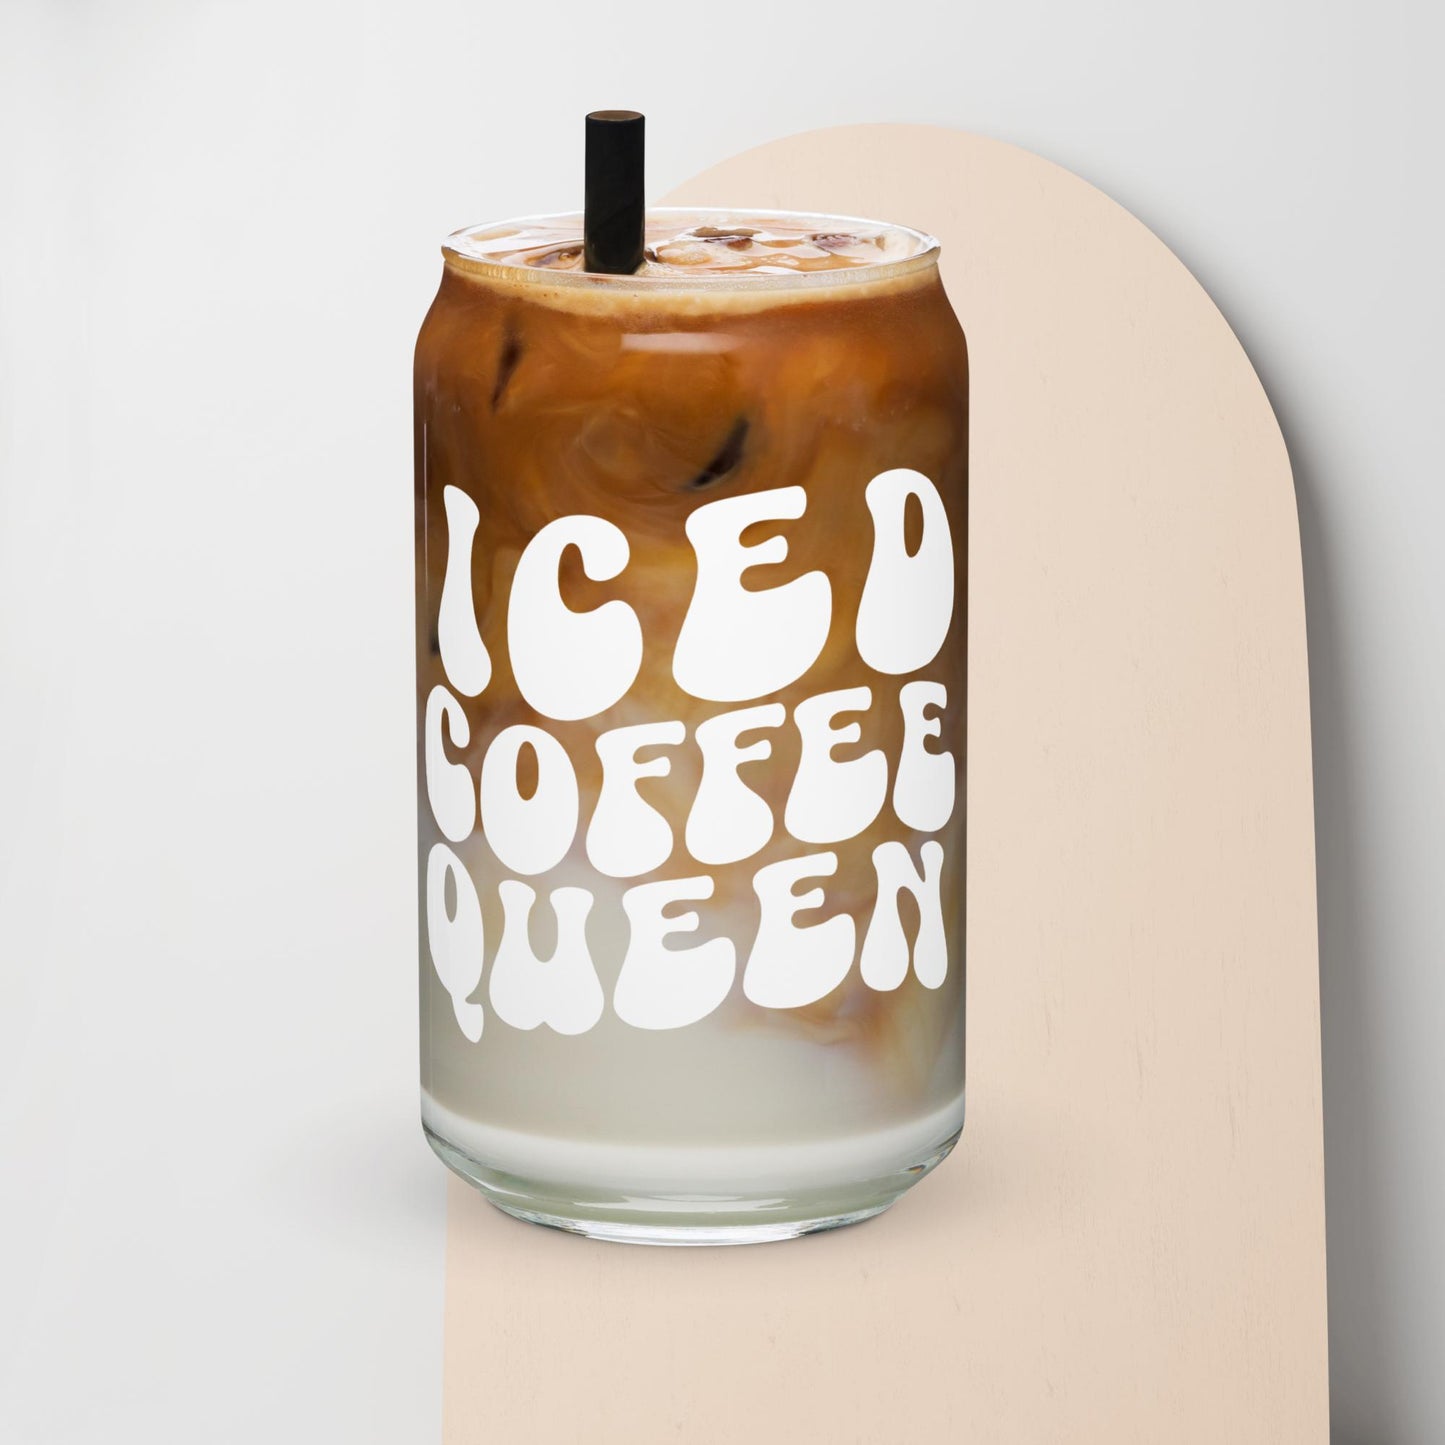 Coffee Queen | Can Shaped Glass | 16oz